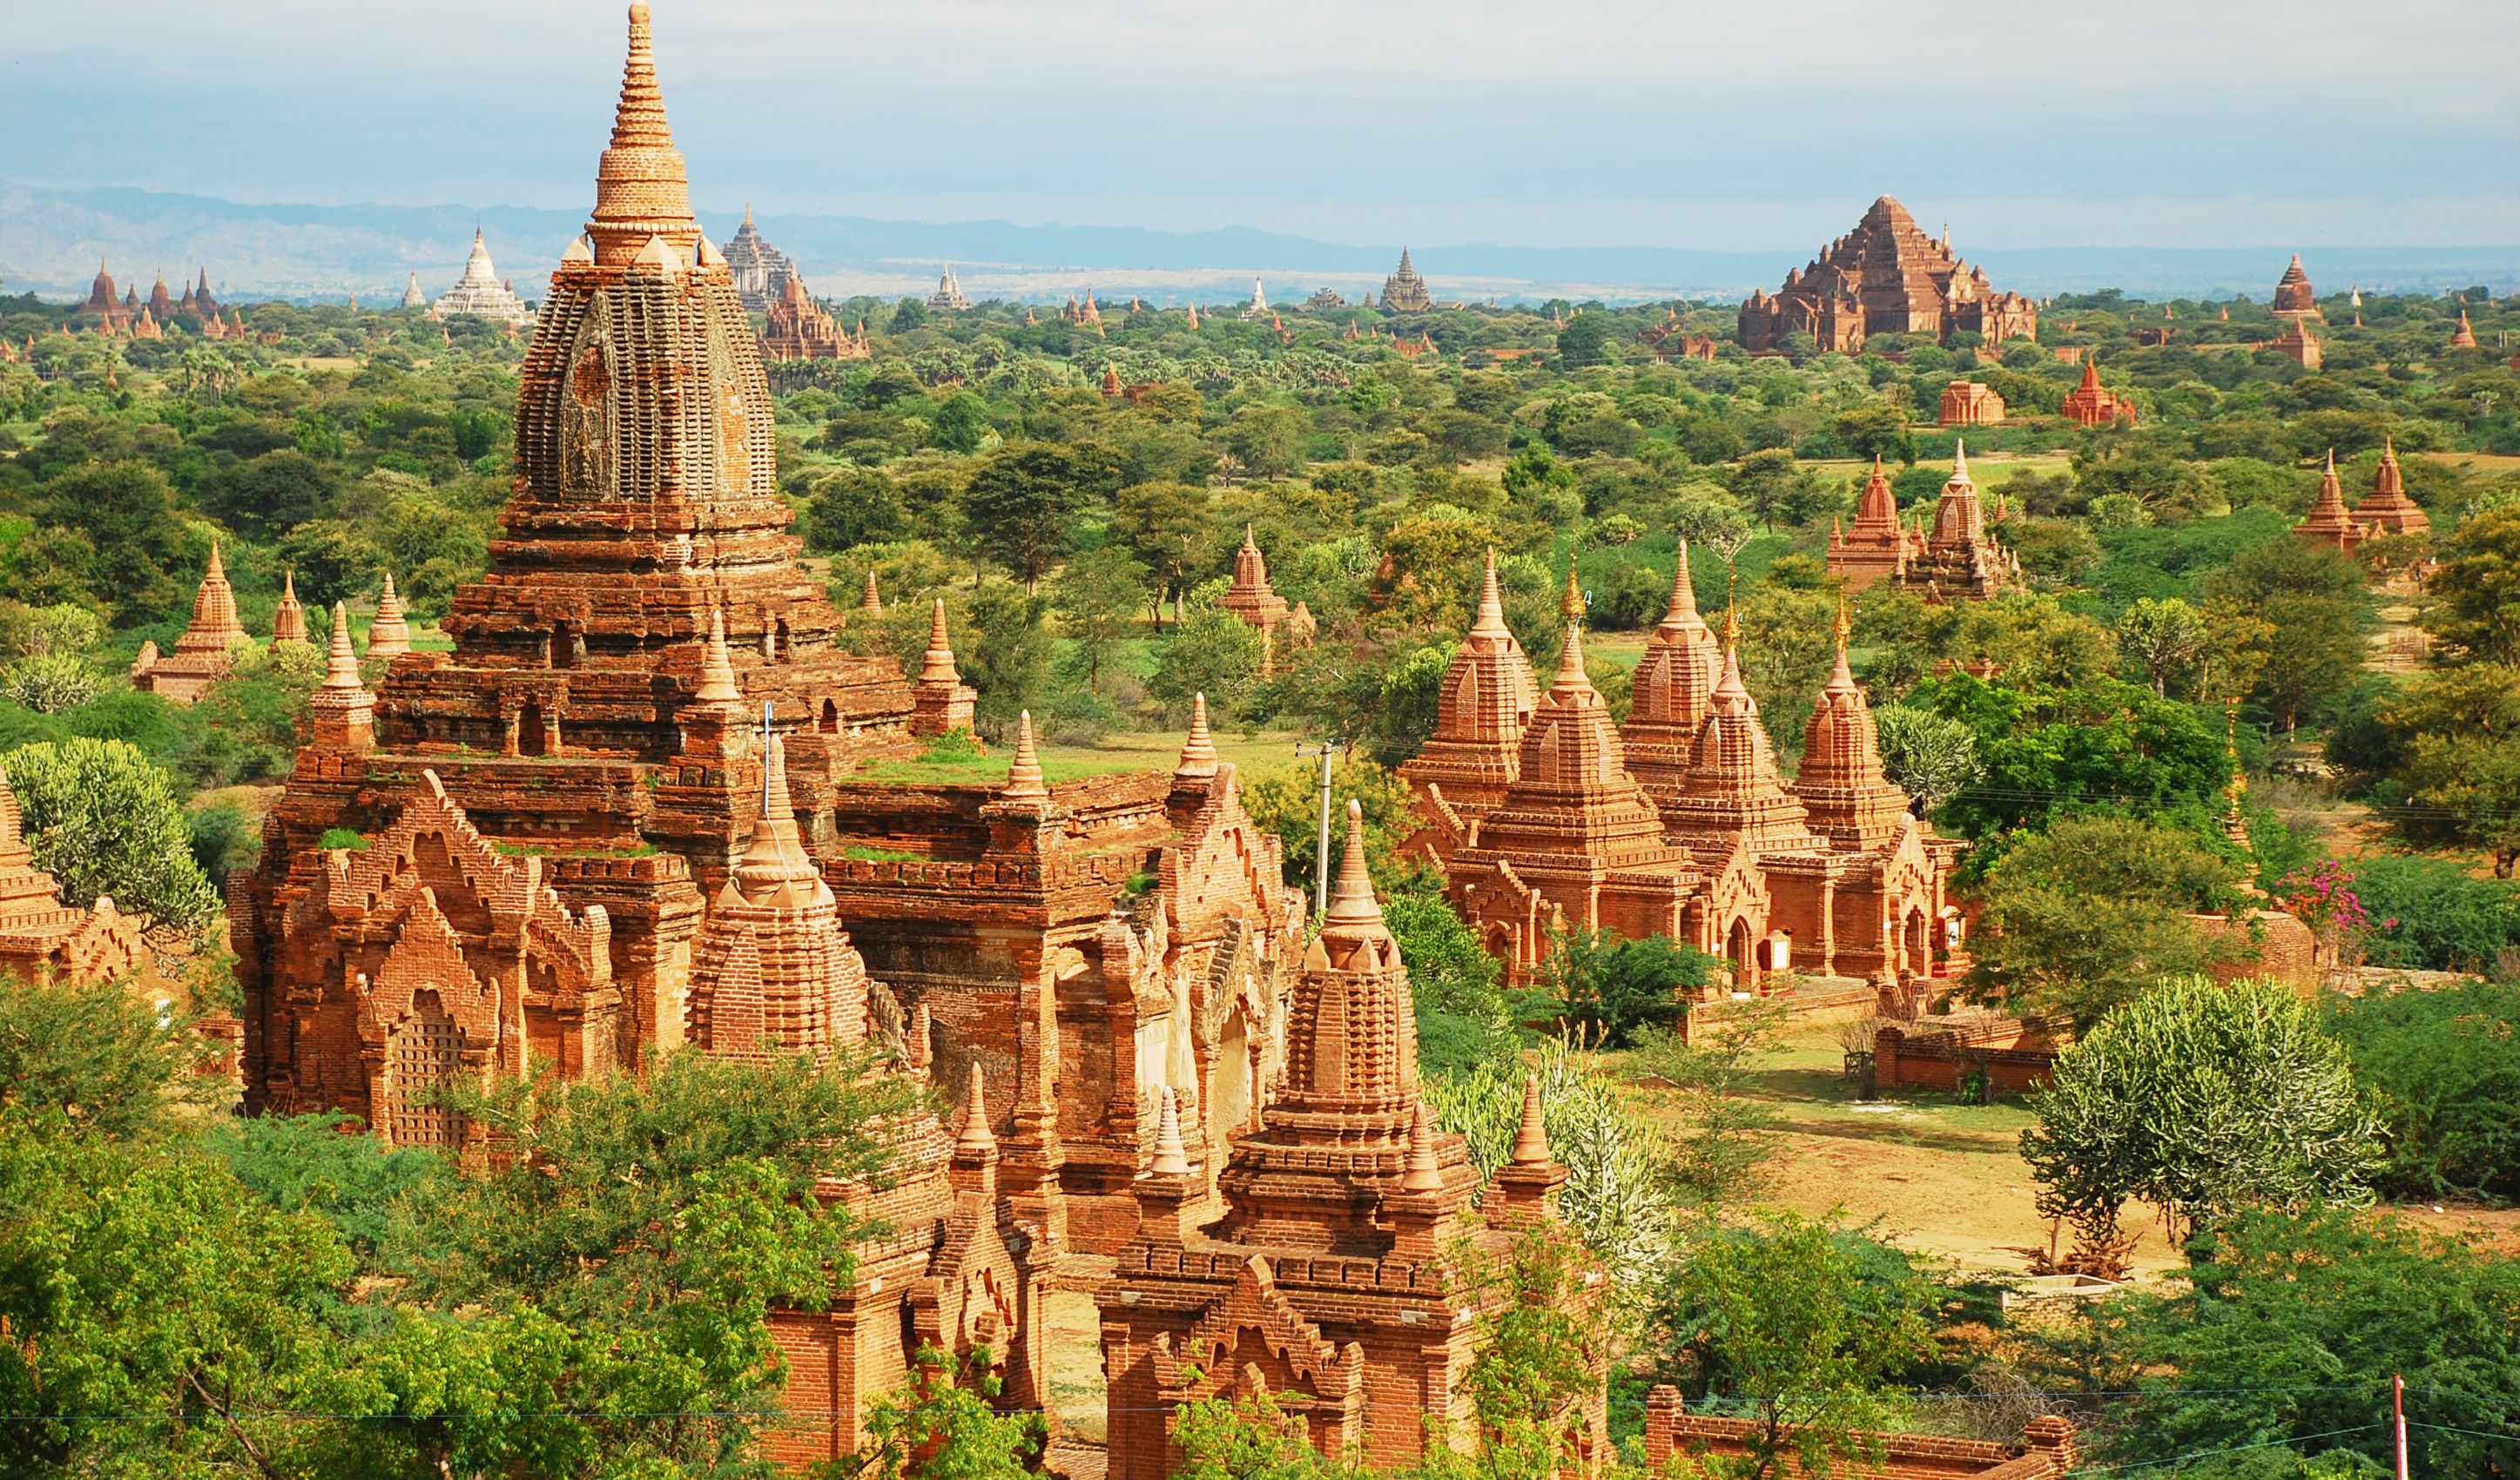 The temples and pagodas of Bagan, in Burma